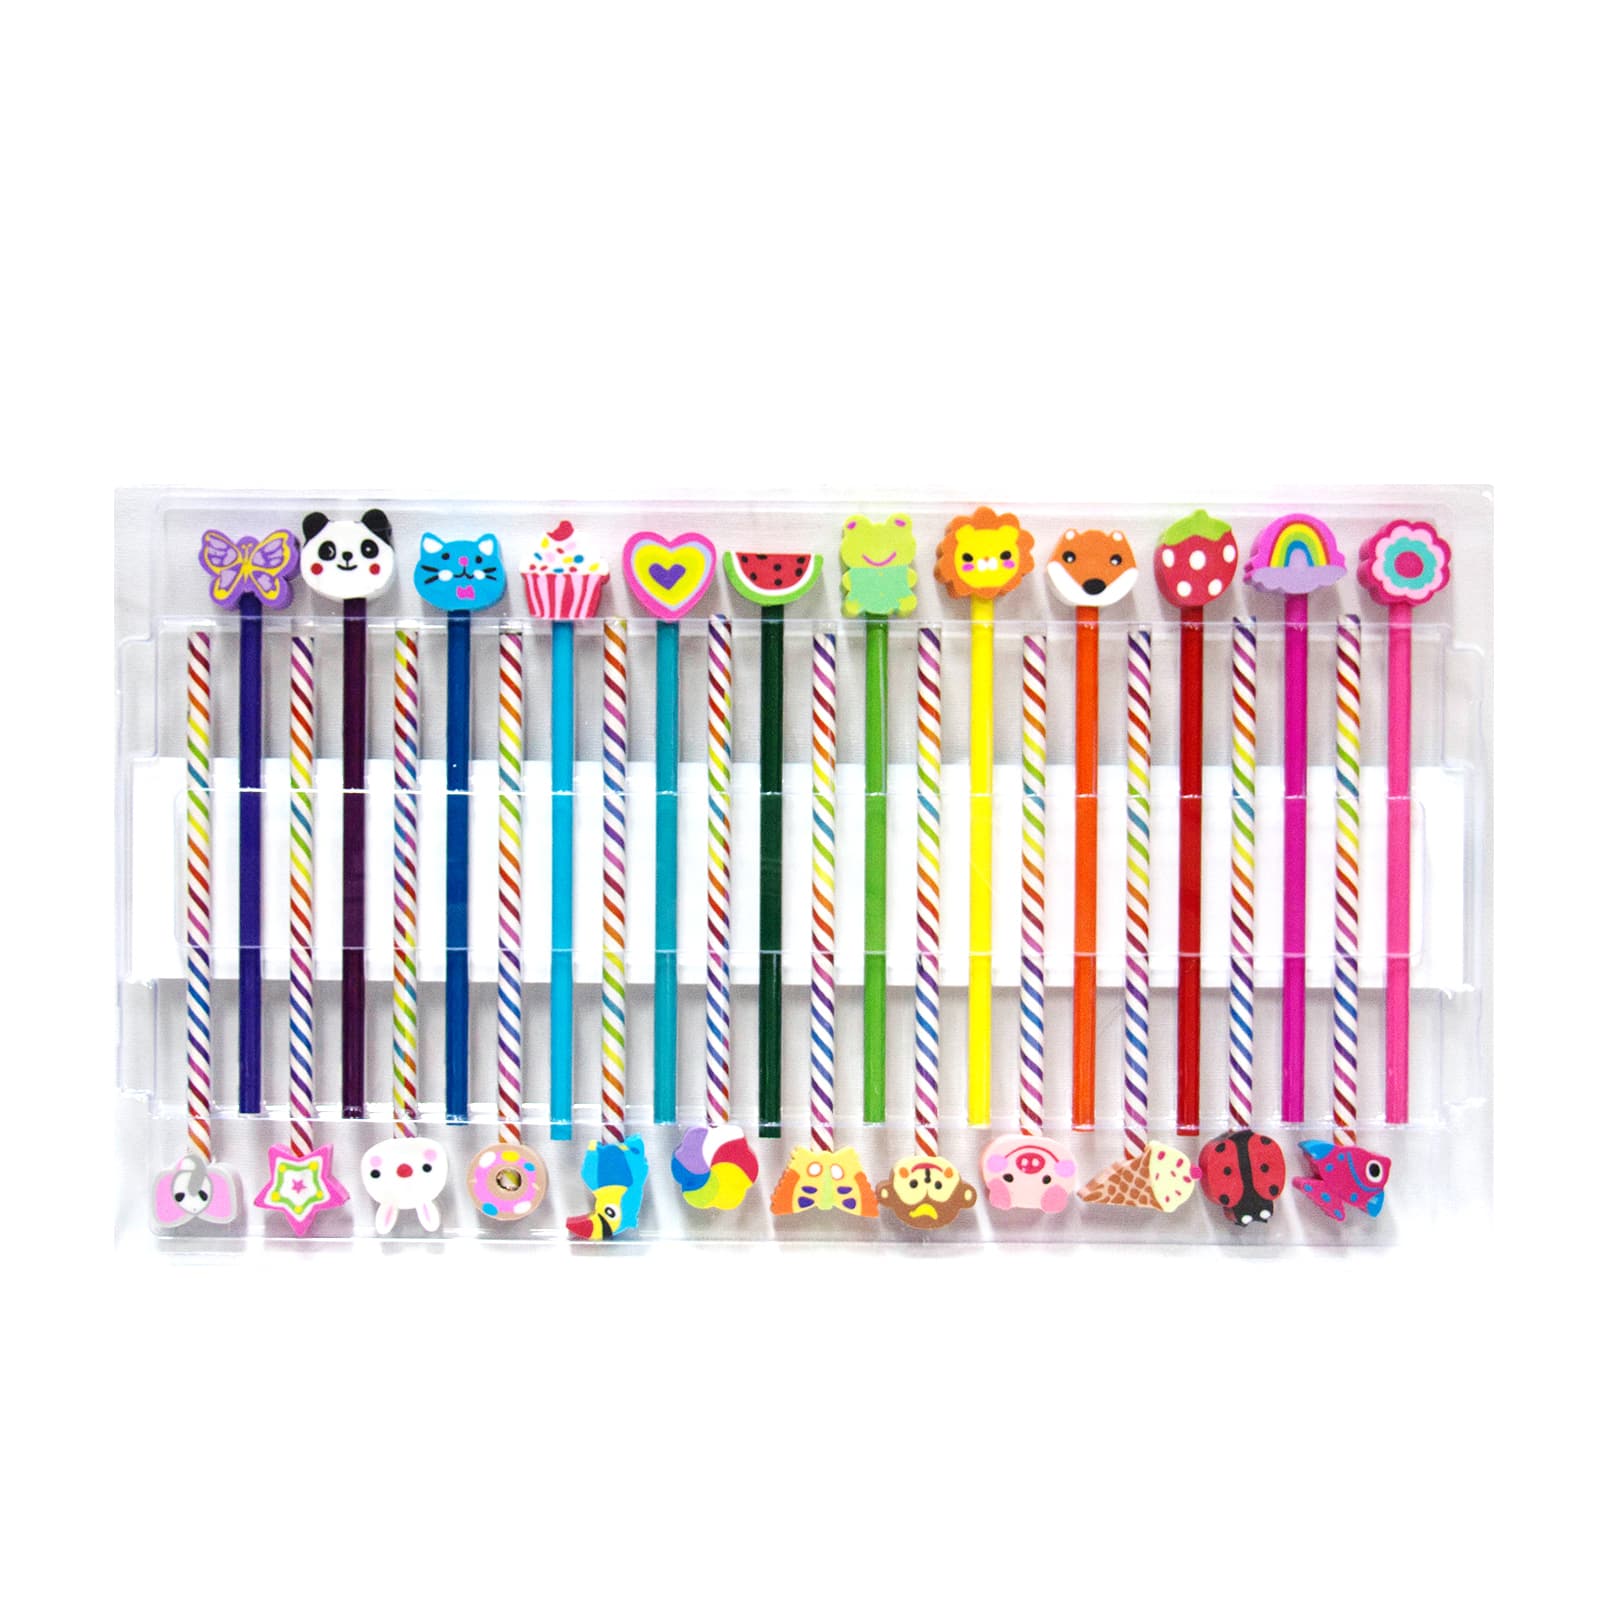 Pencil Party Pack By Creatology&#x2122;, 48pc